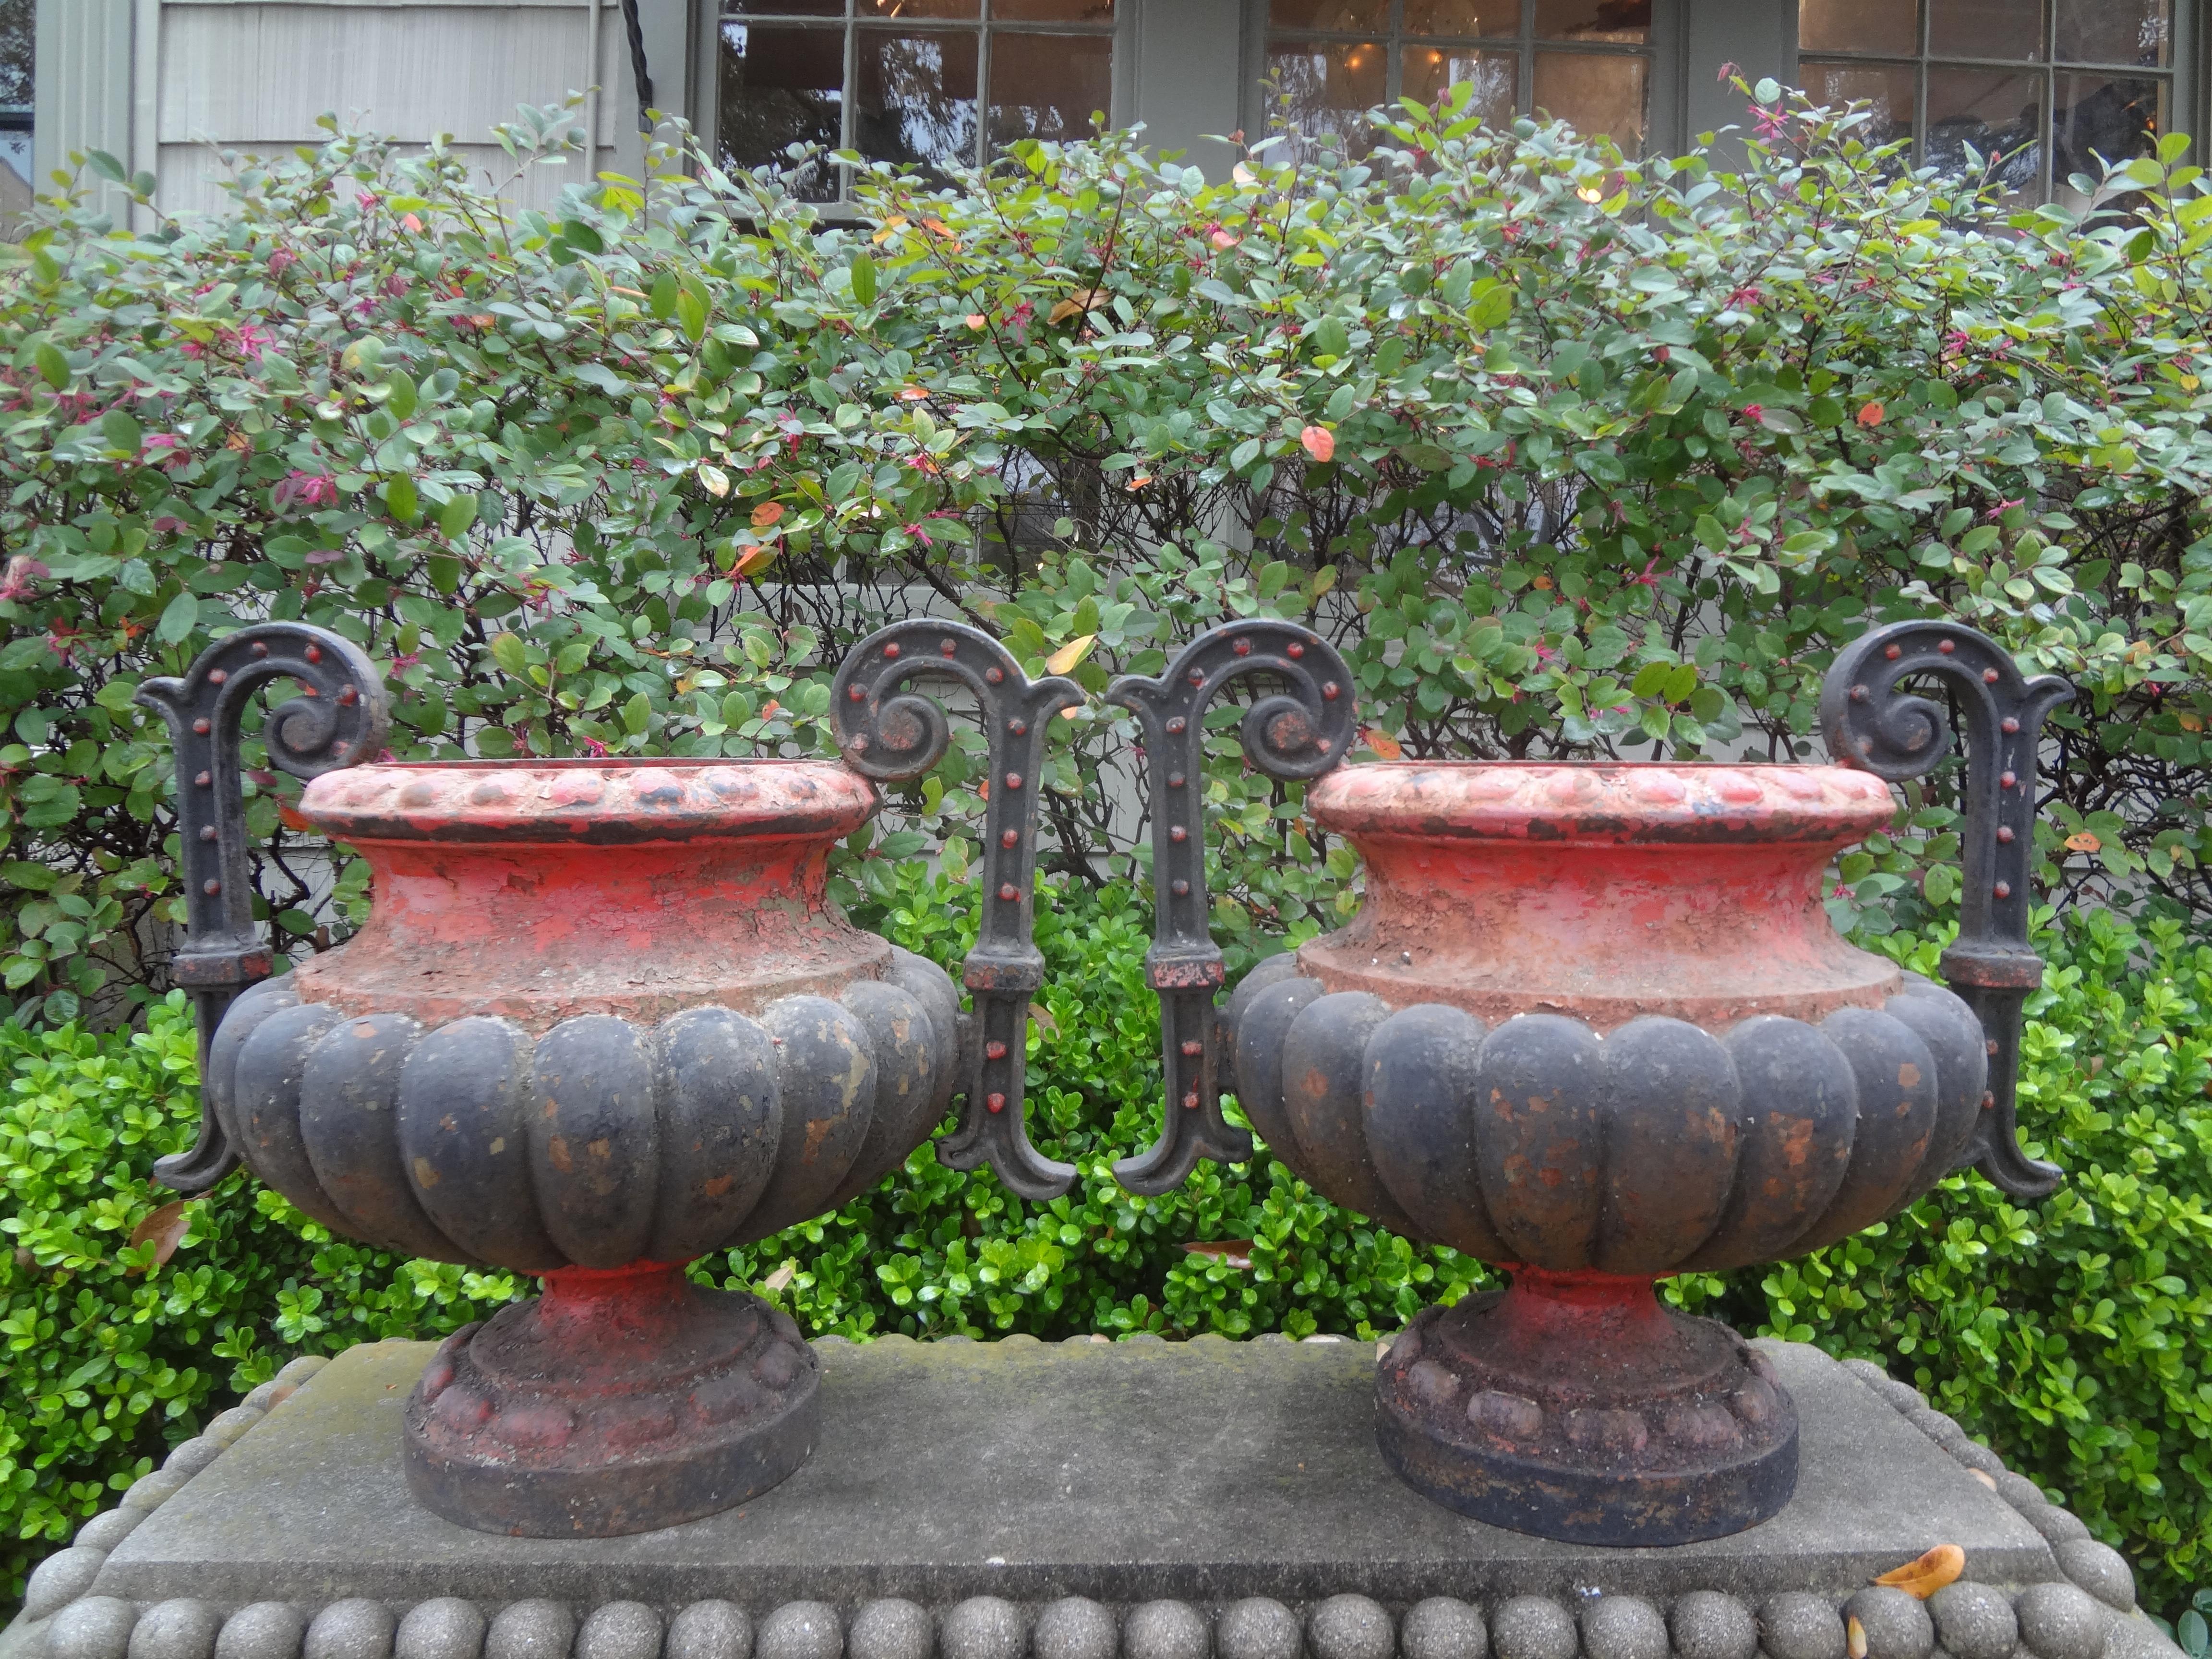 Pair of 19th century French iron garden urns.
This pair of 19th century cast iron urns is attributed to Corneau Charleville Foundry.
The Corneau brothers Emile and Alfred became business partners in 1846, by 1856 they had set up in the Petit-Bois